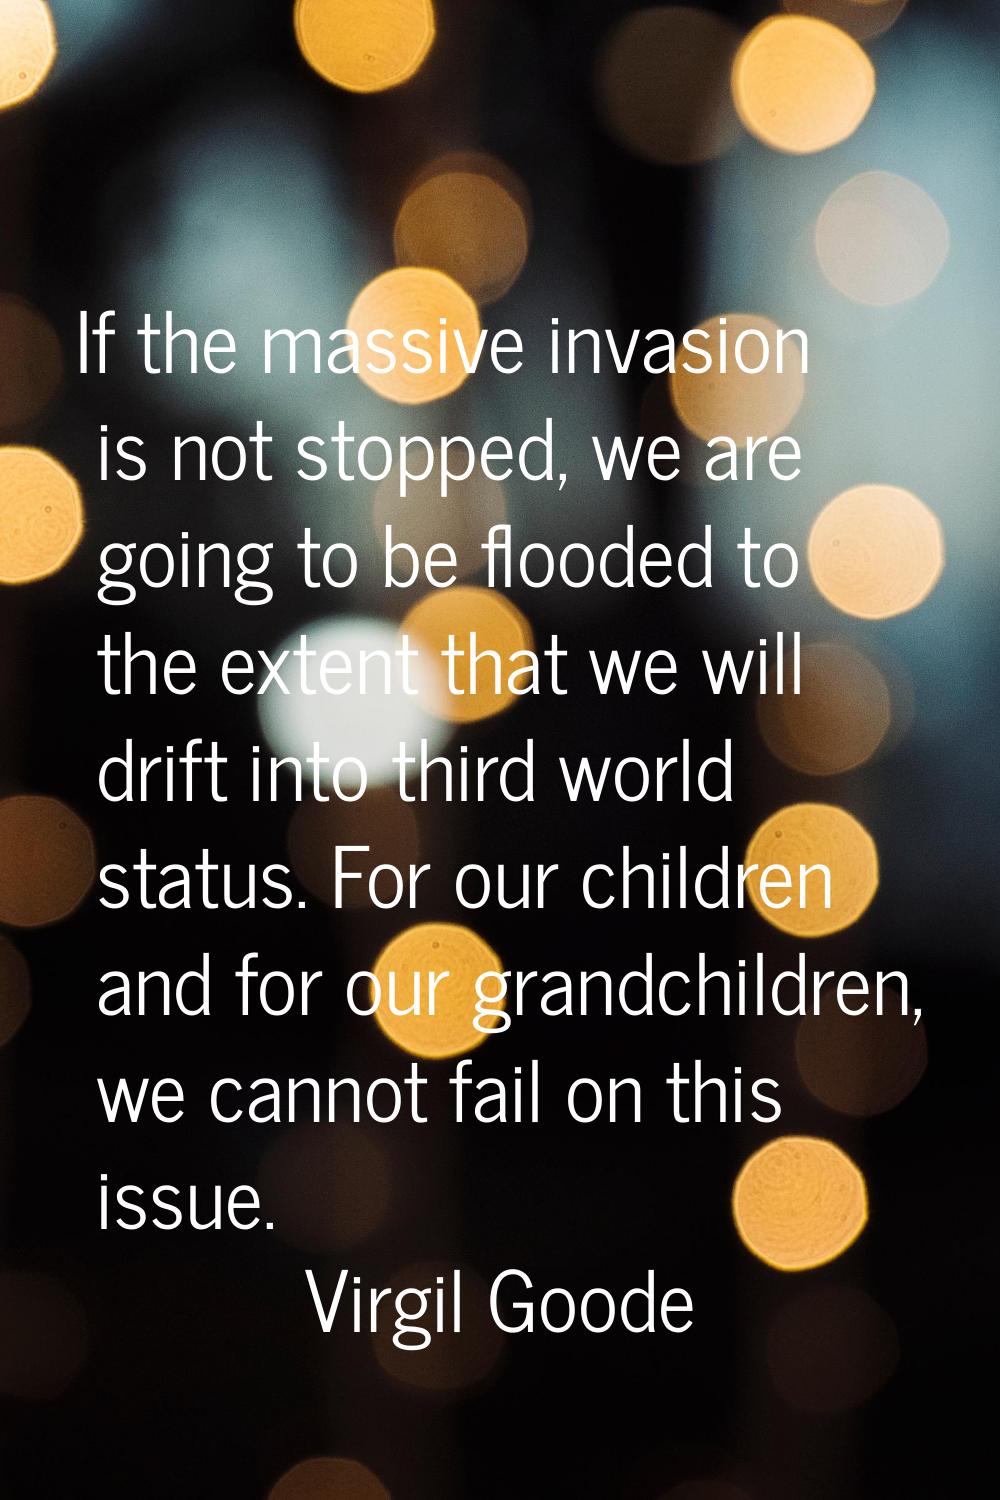 If the massive invasion is not stopped, we are going to be flooded to the extent that we will drift